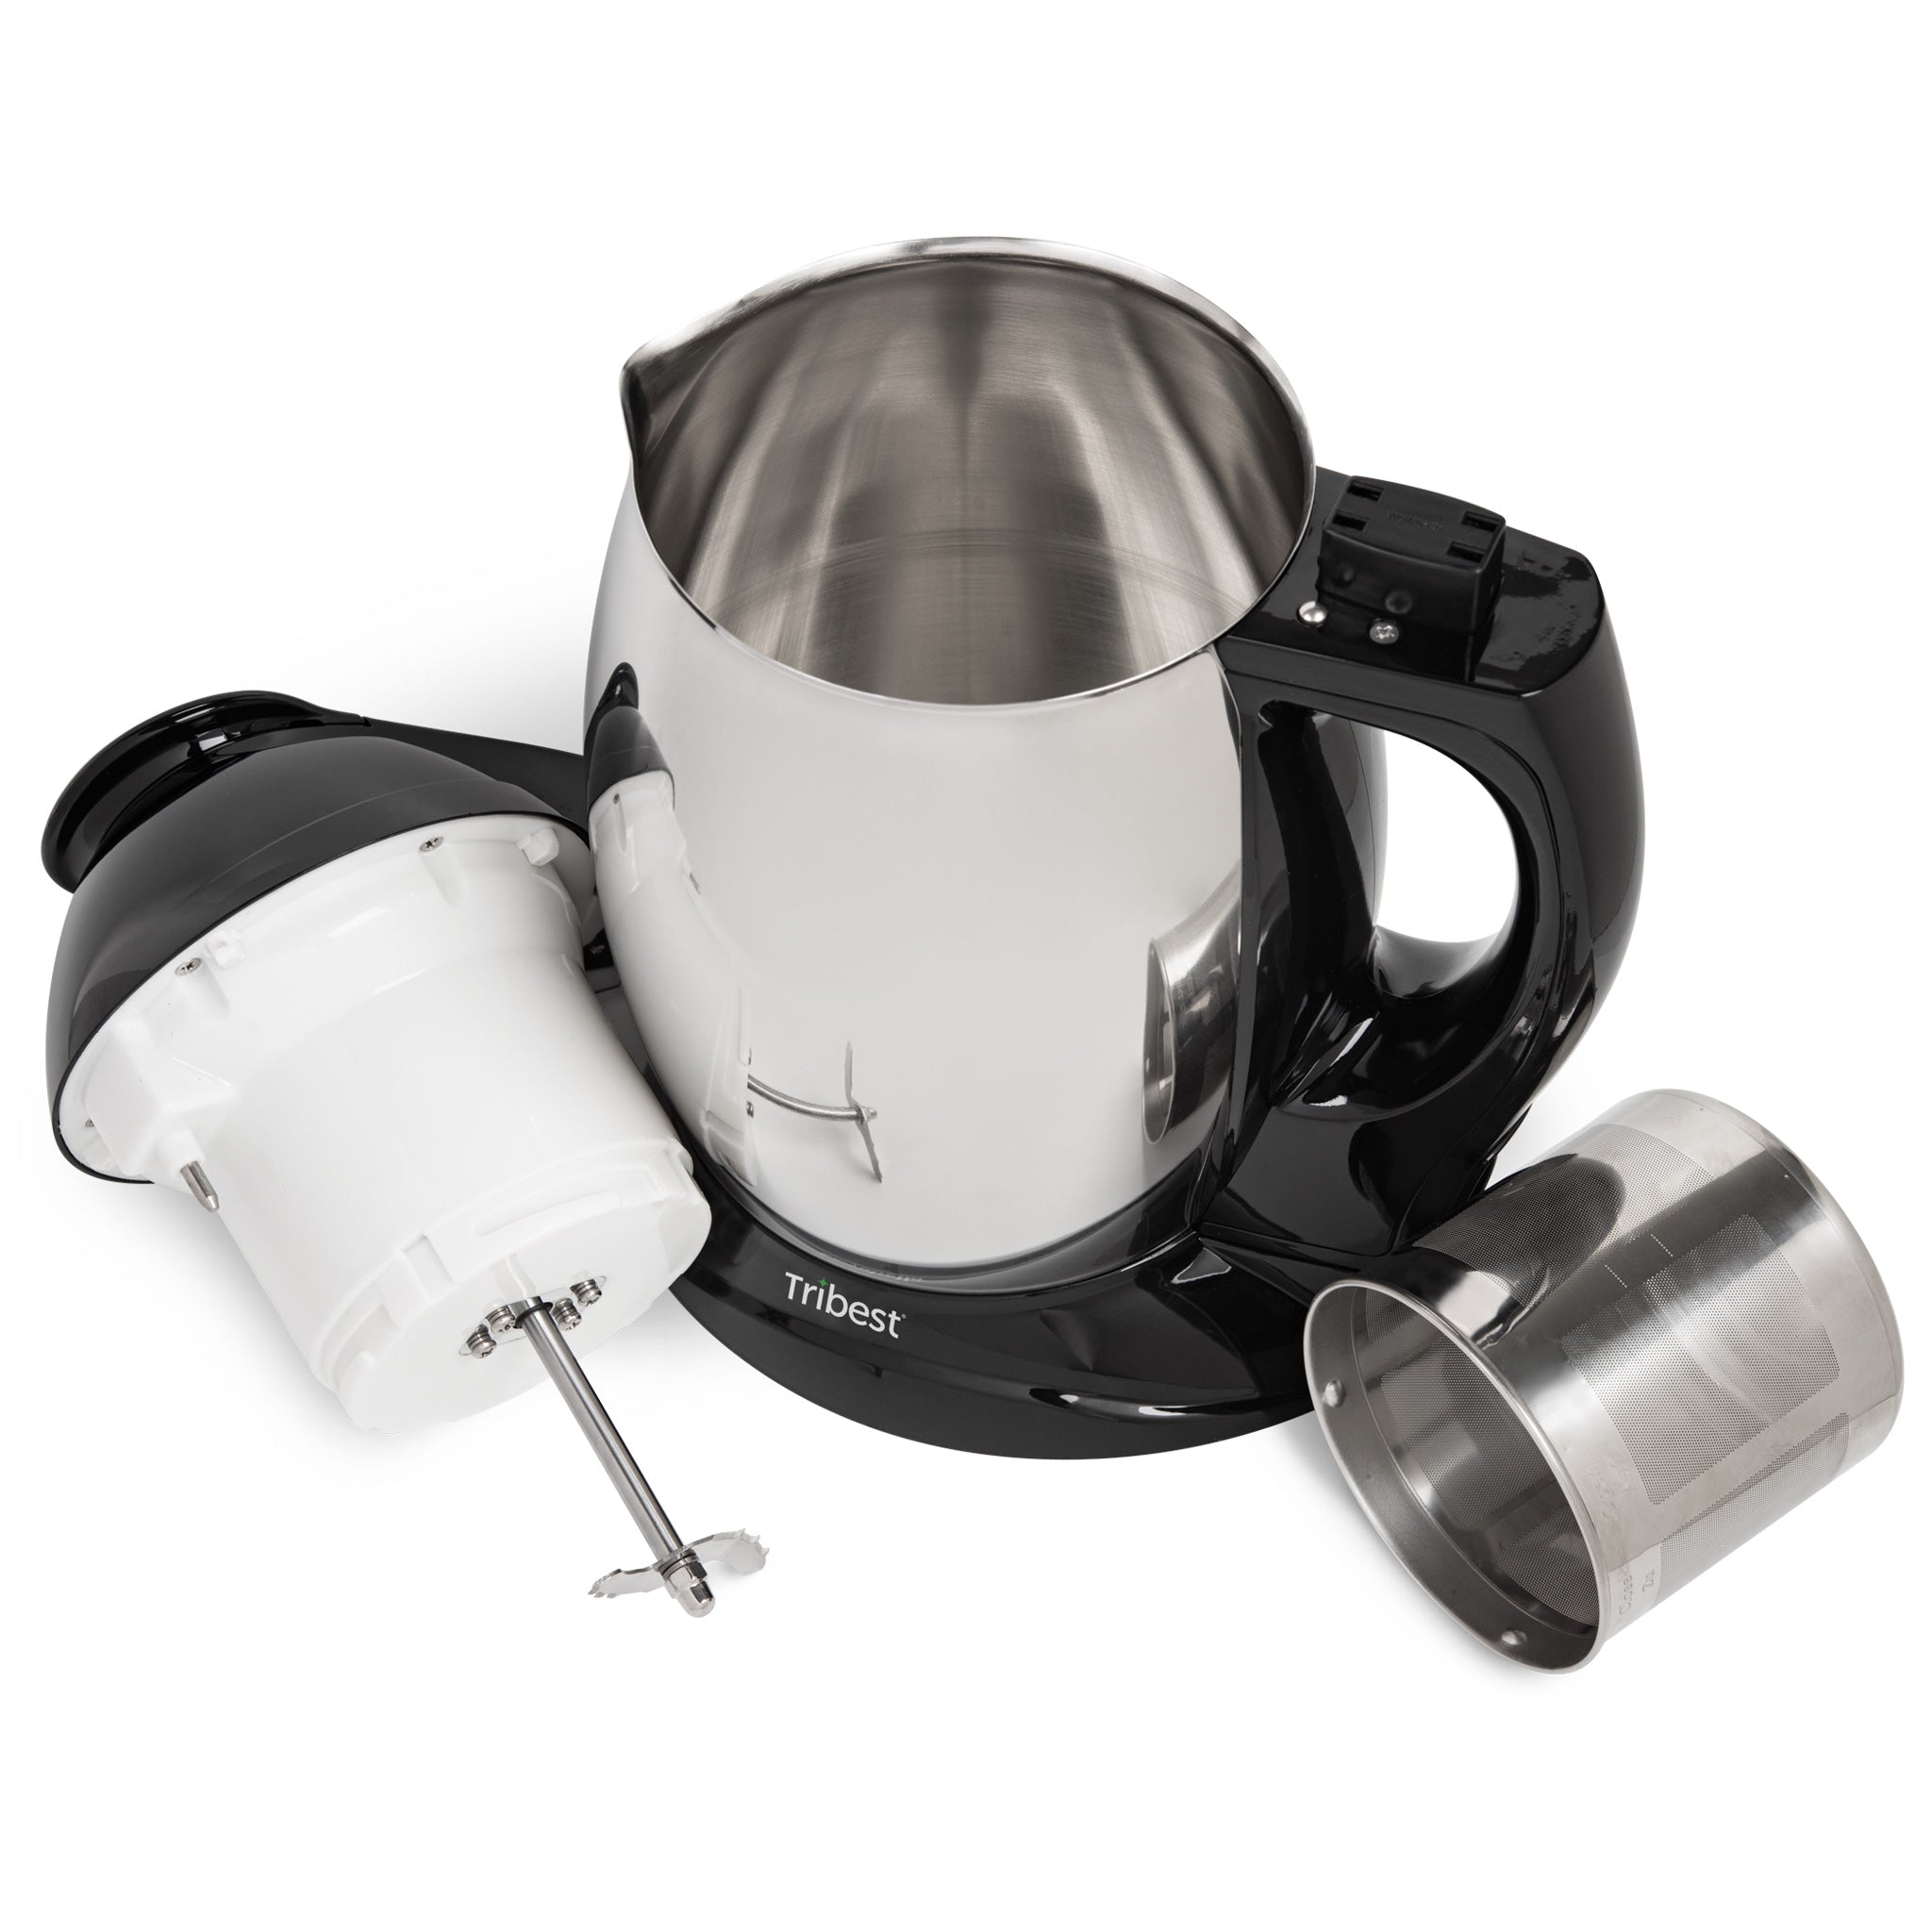  Bloom Nutrition Milk Frother Hand Mixer, Stainless